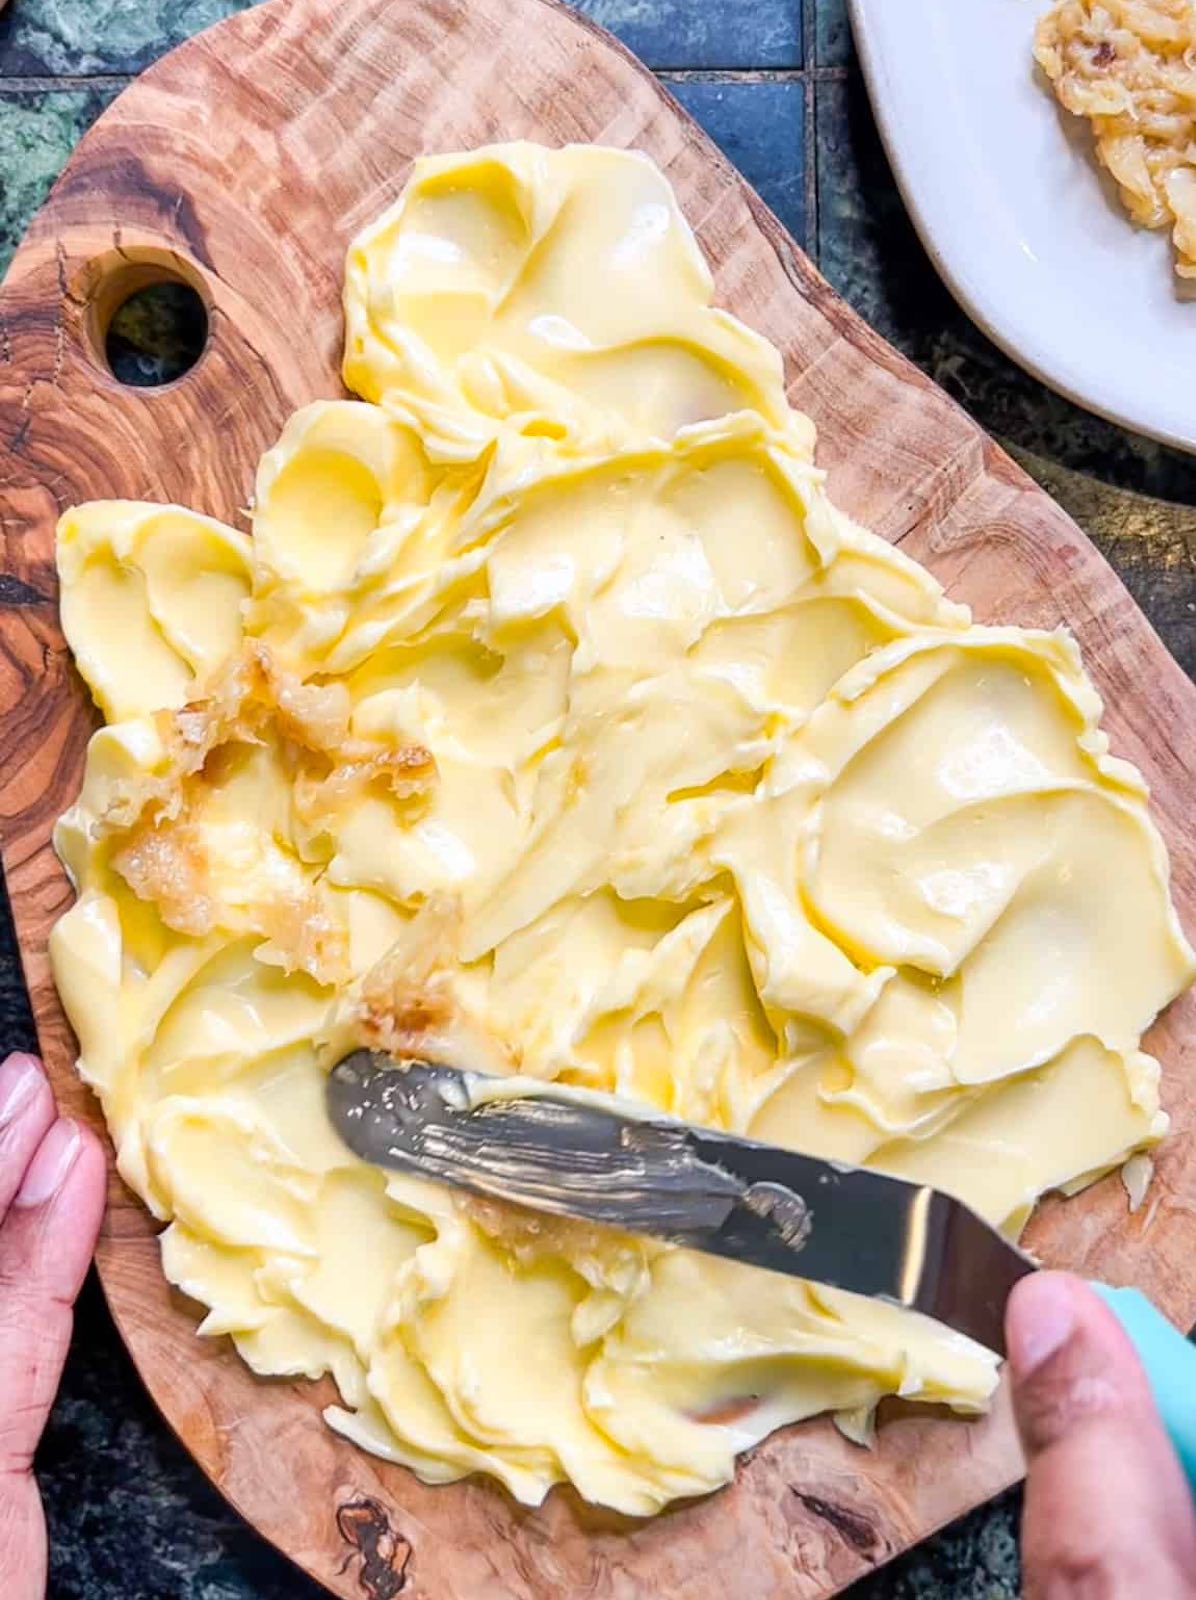 Spreading mashed roasted garlic on softened butter on a board.